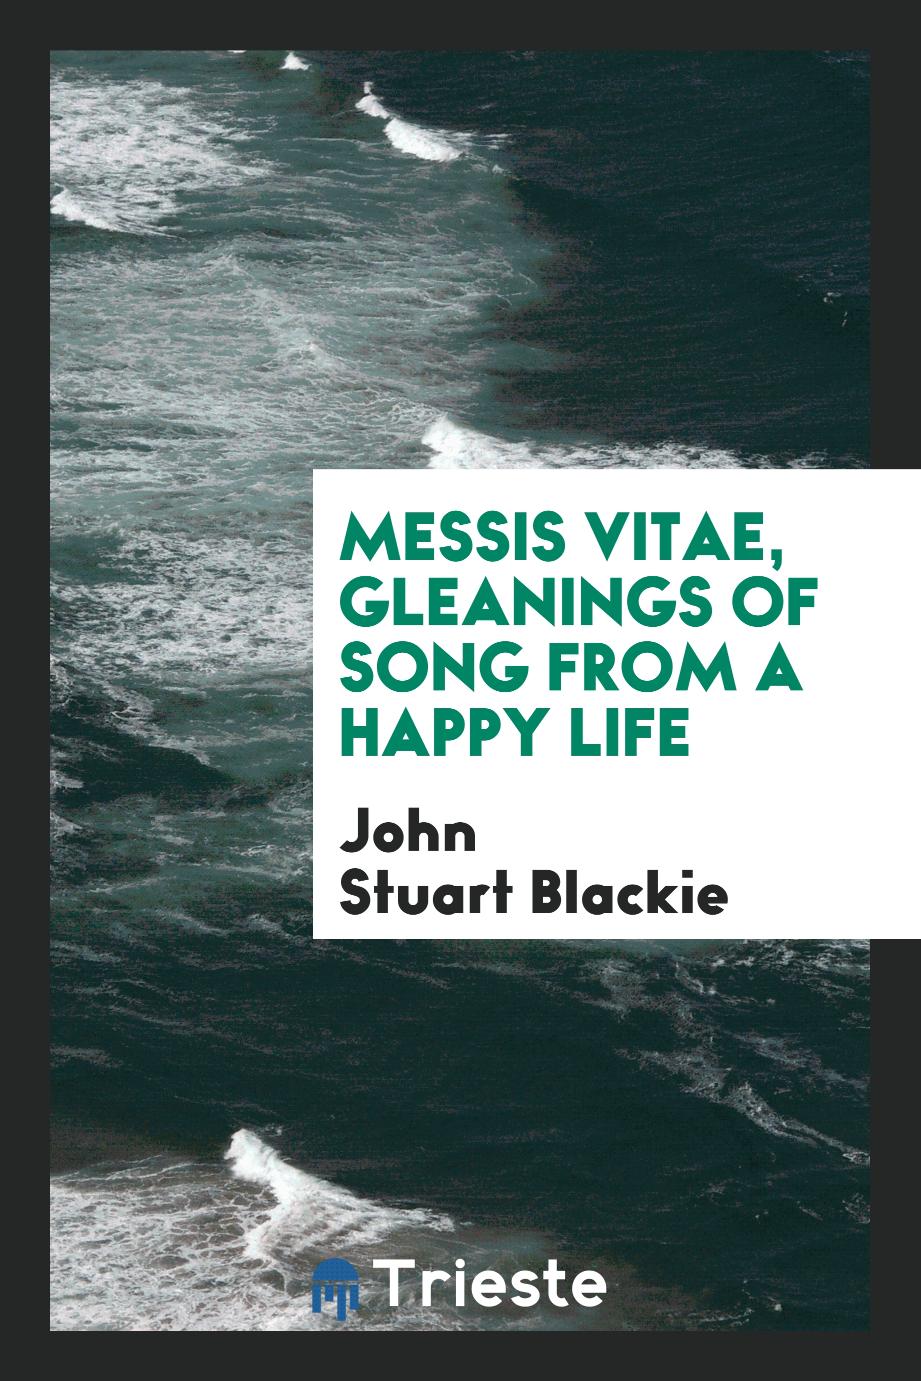 Messis vitae, gleanings of song from a happy life